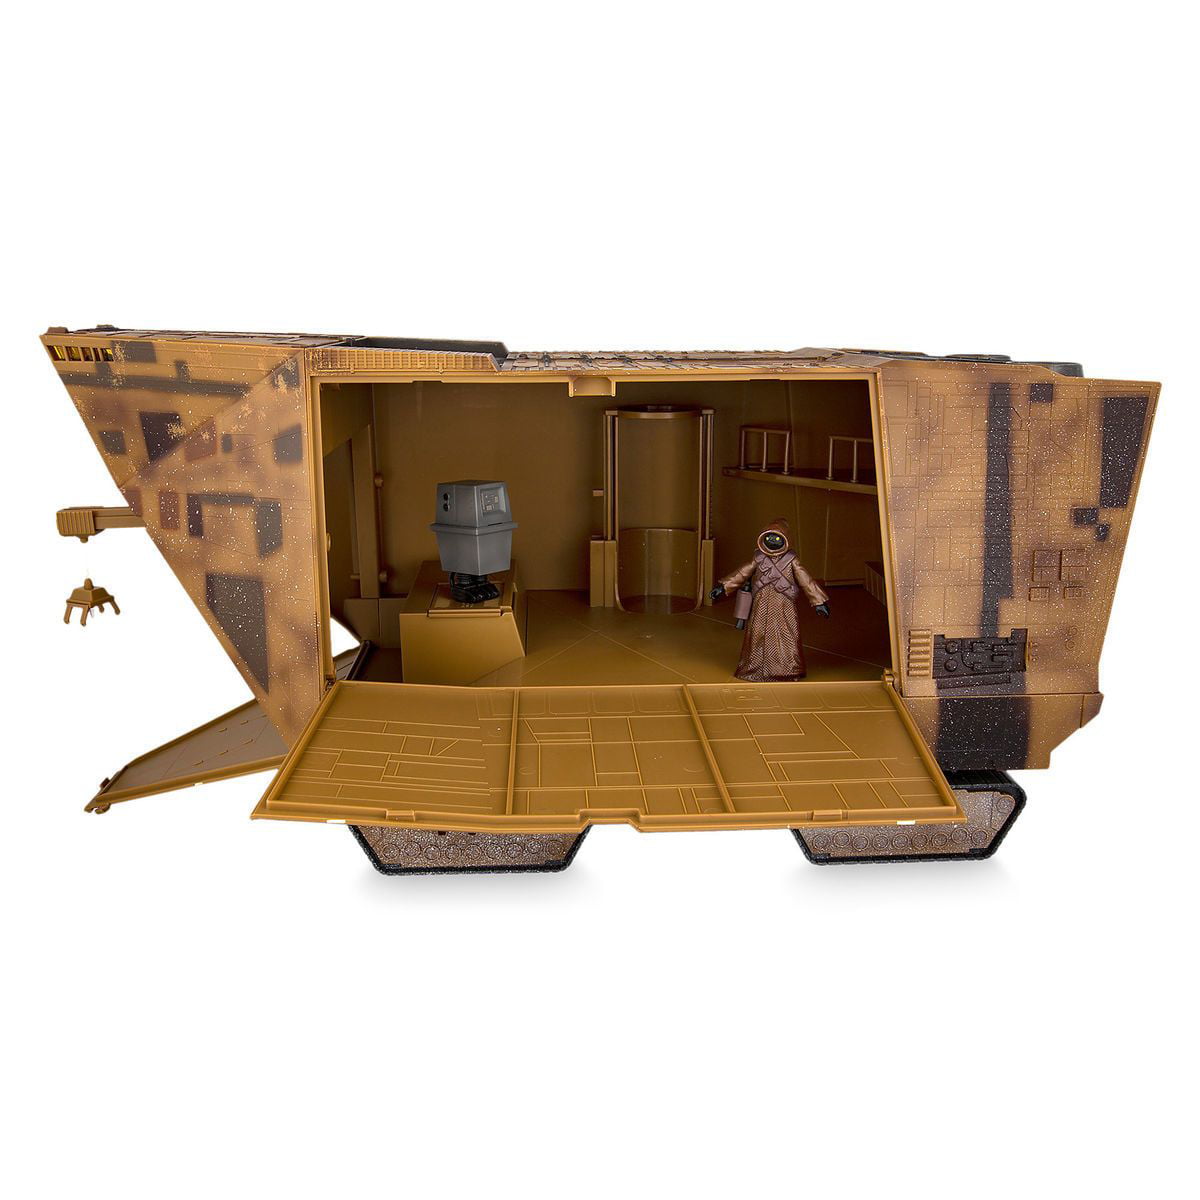 Details about   New Disney Parks Star Wars Droid Factory Sandcrawler Playset Jawa Gonk Droid 